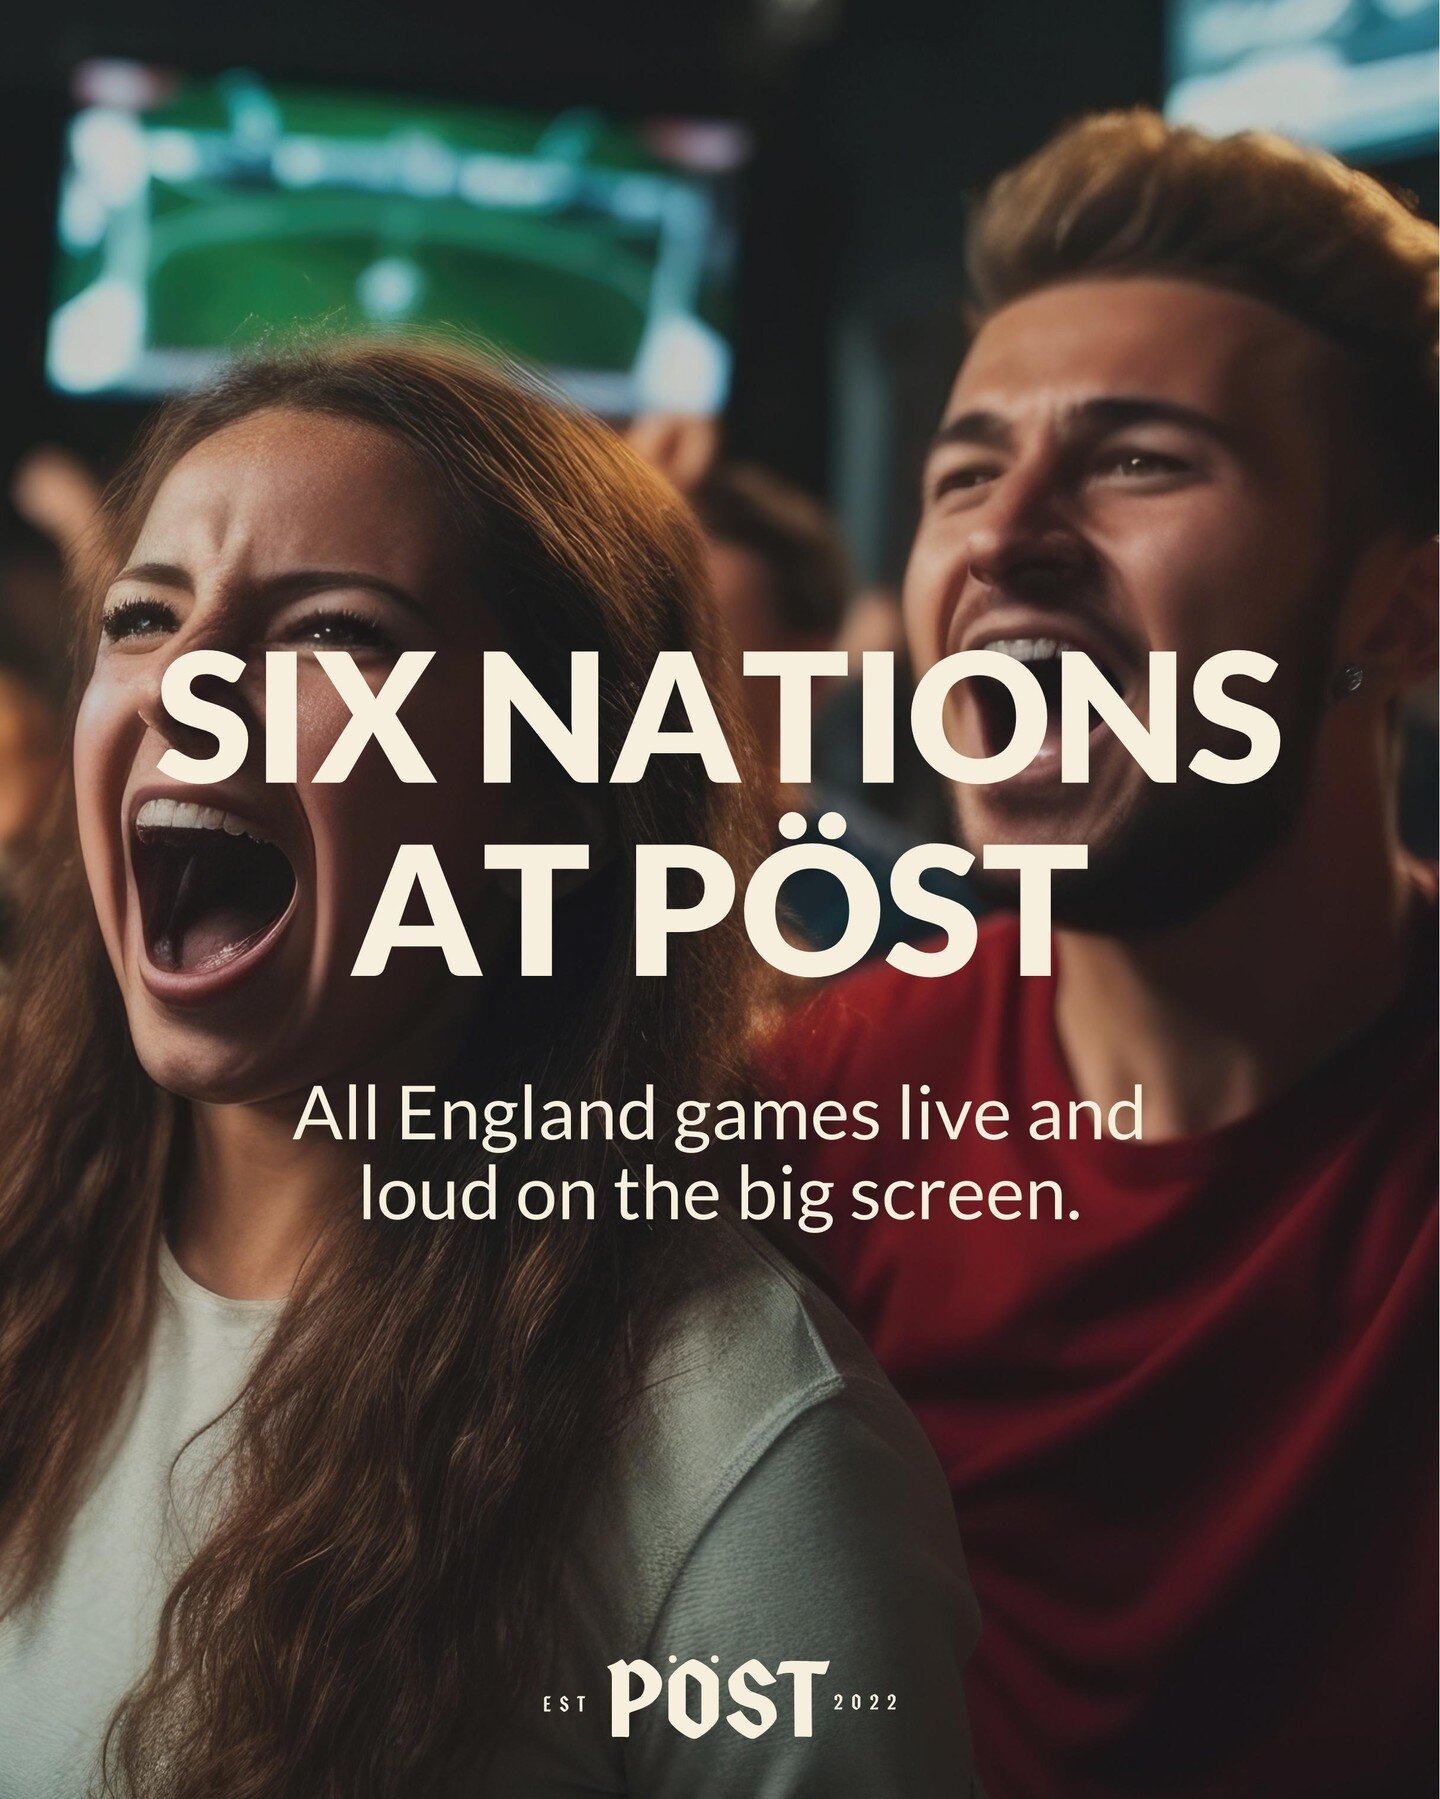 Six Nations at P&ouml;st!

Join us to support England, starting with a Six Nations Bottomless Party for England&rsquo;s first game against Italy. Plus enjoy our Bottomless Bier and Bratwurst offer for the remaining England matches.

Big screens, long